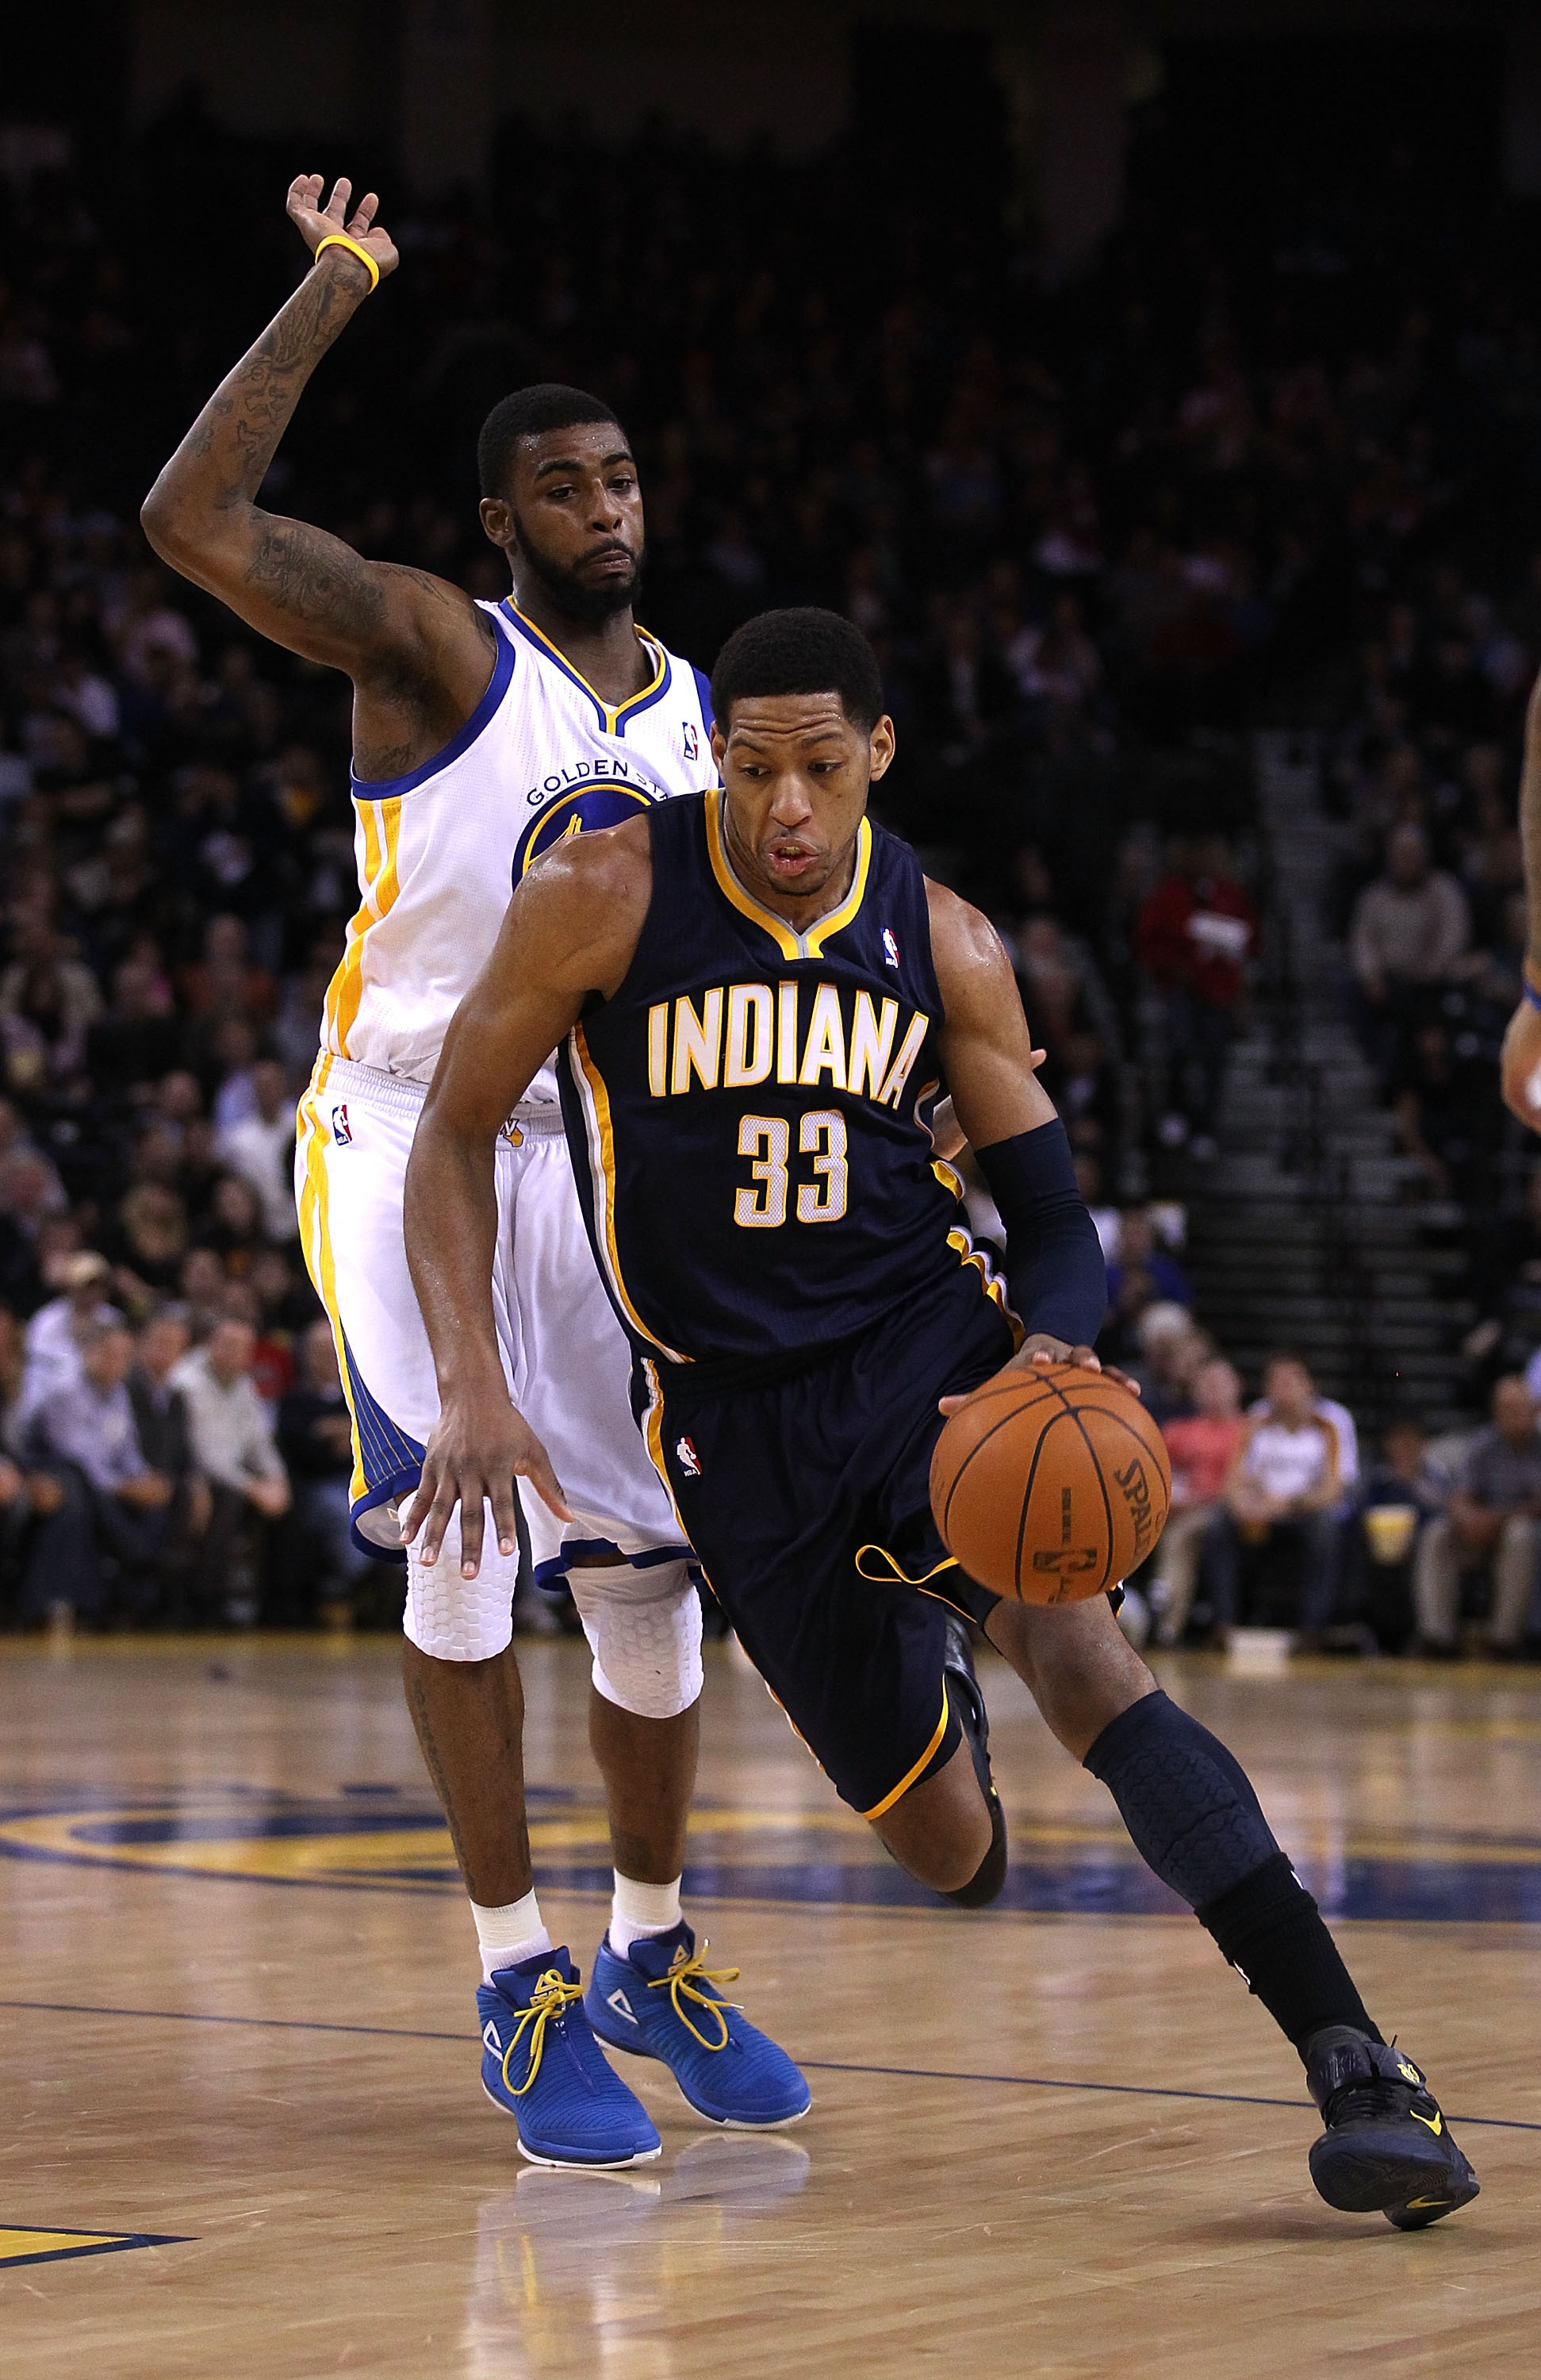 OAKLAND, CA - JANUARY 19:  Danny Granger #33 of the Indiana Pacers in action against the Golden State Warriors at Oracle Arena on January 19, 2011 in Oakland, California.  NOTE TO USER: User expressly acknowledges and agrees that, by downloading and or us